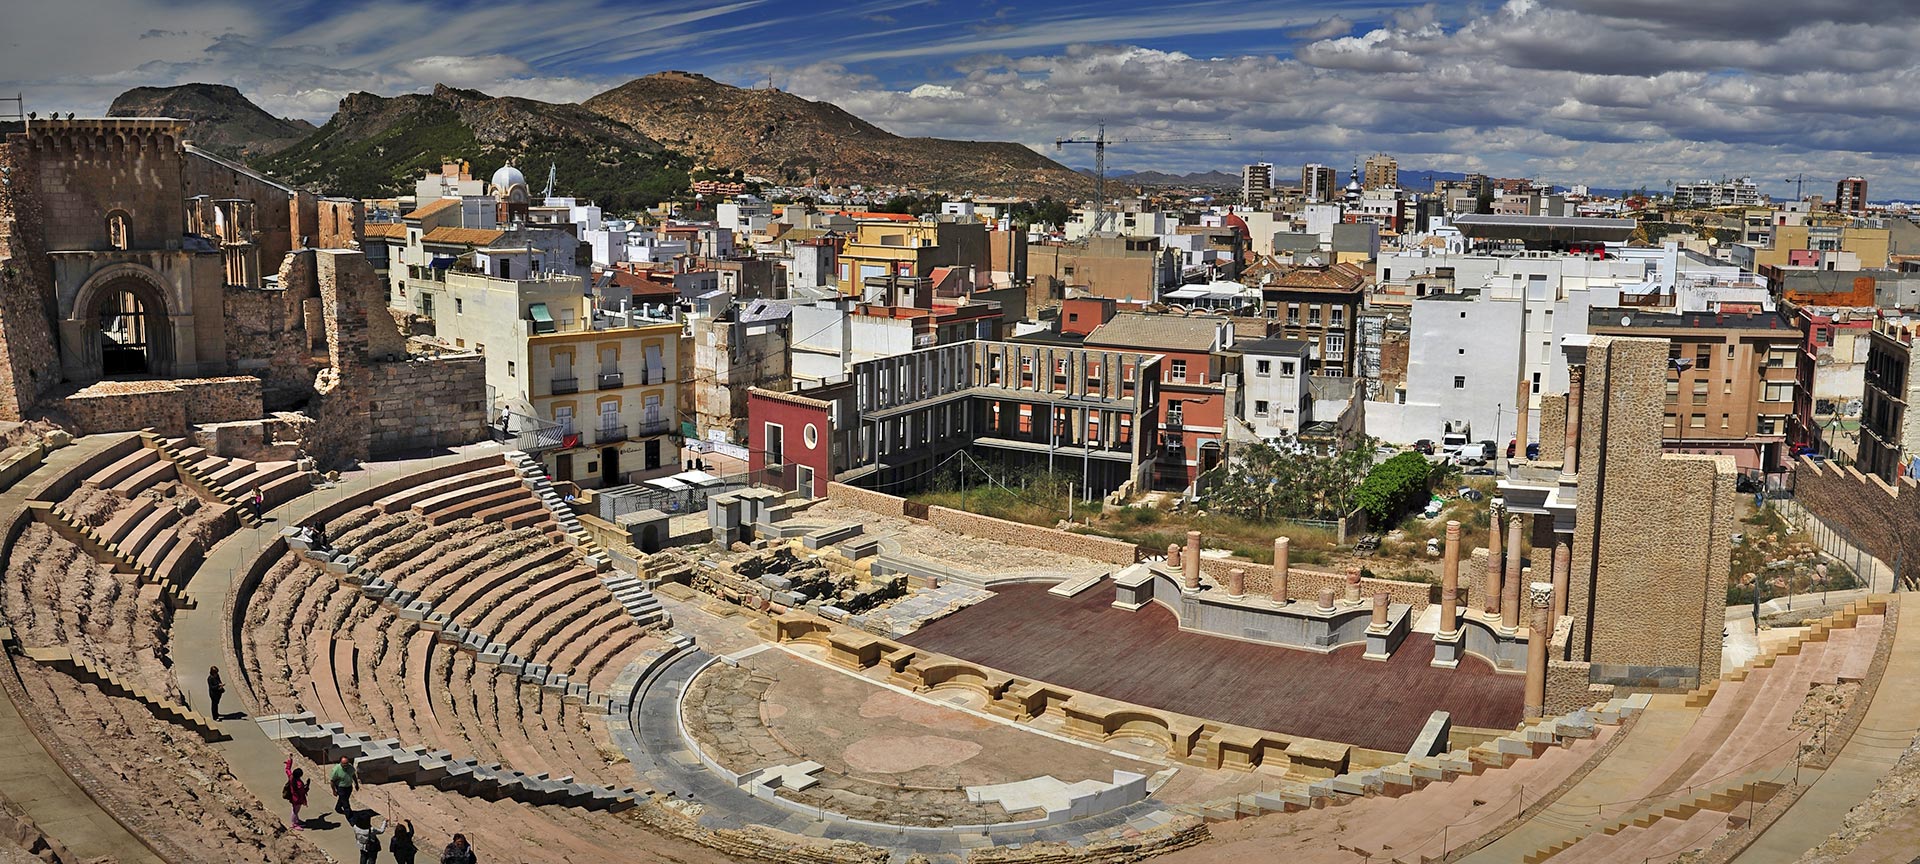 Roman theatre with Cartagena in the background